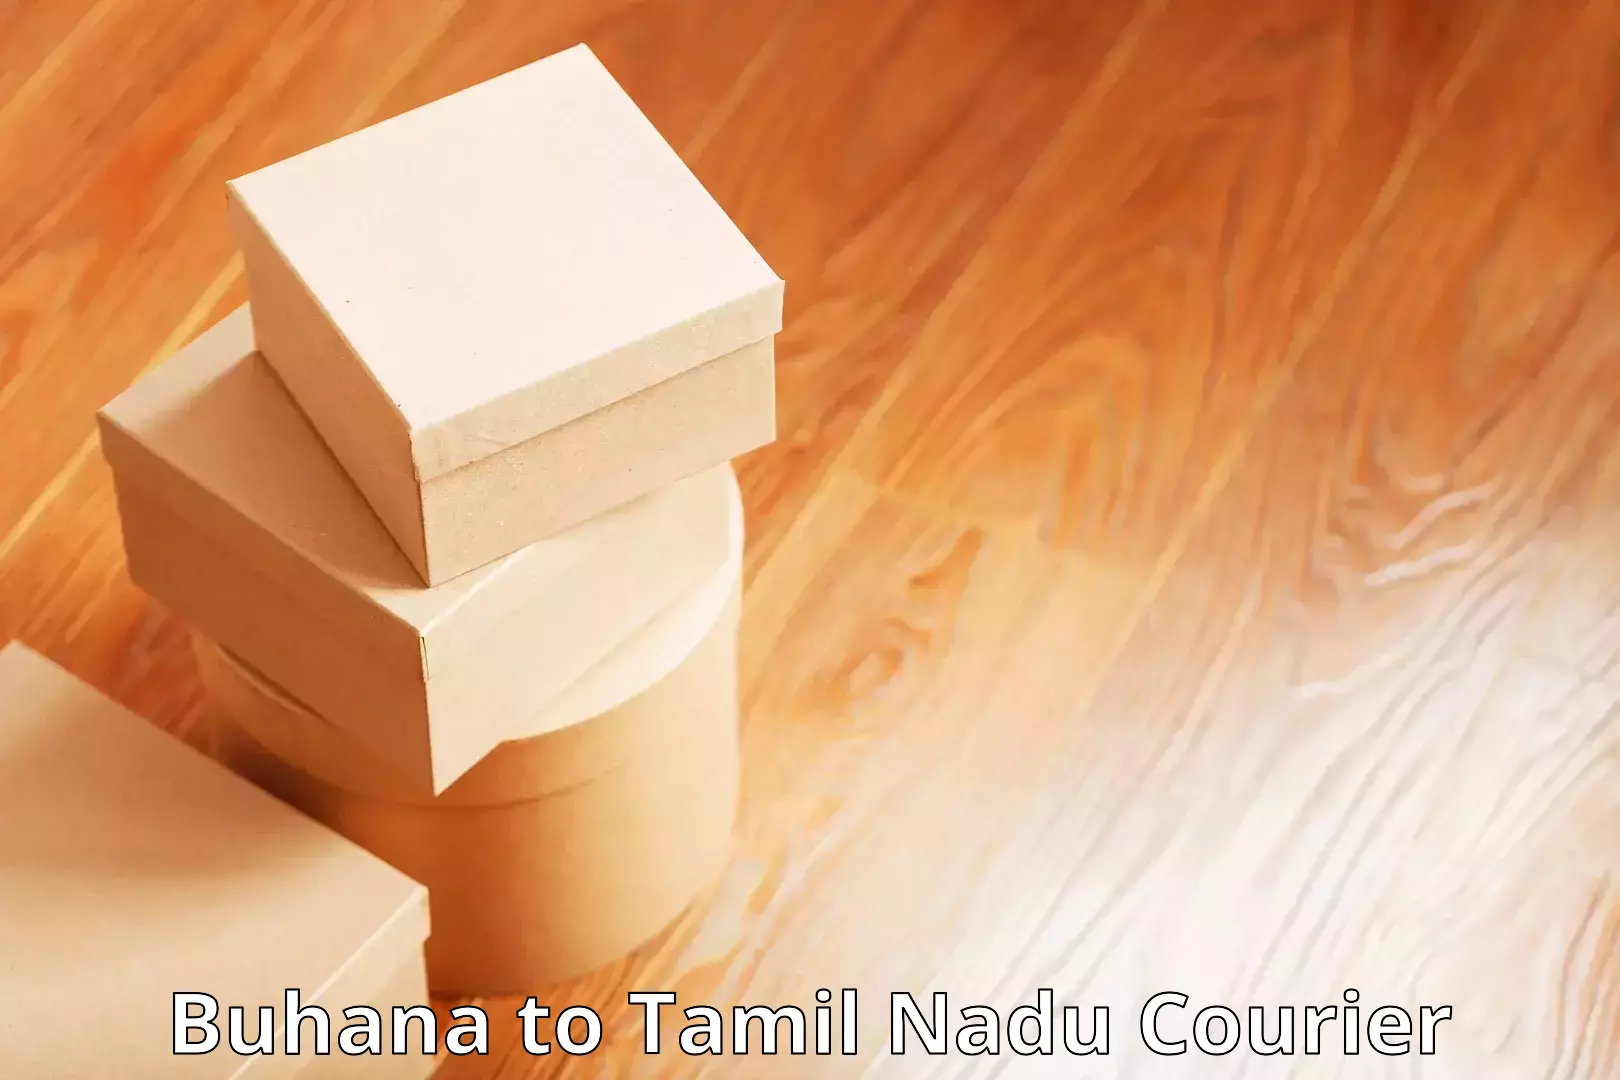 Affordable parcel service in Buhana to Anna University Chennai